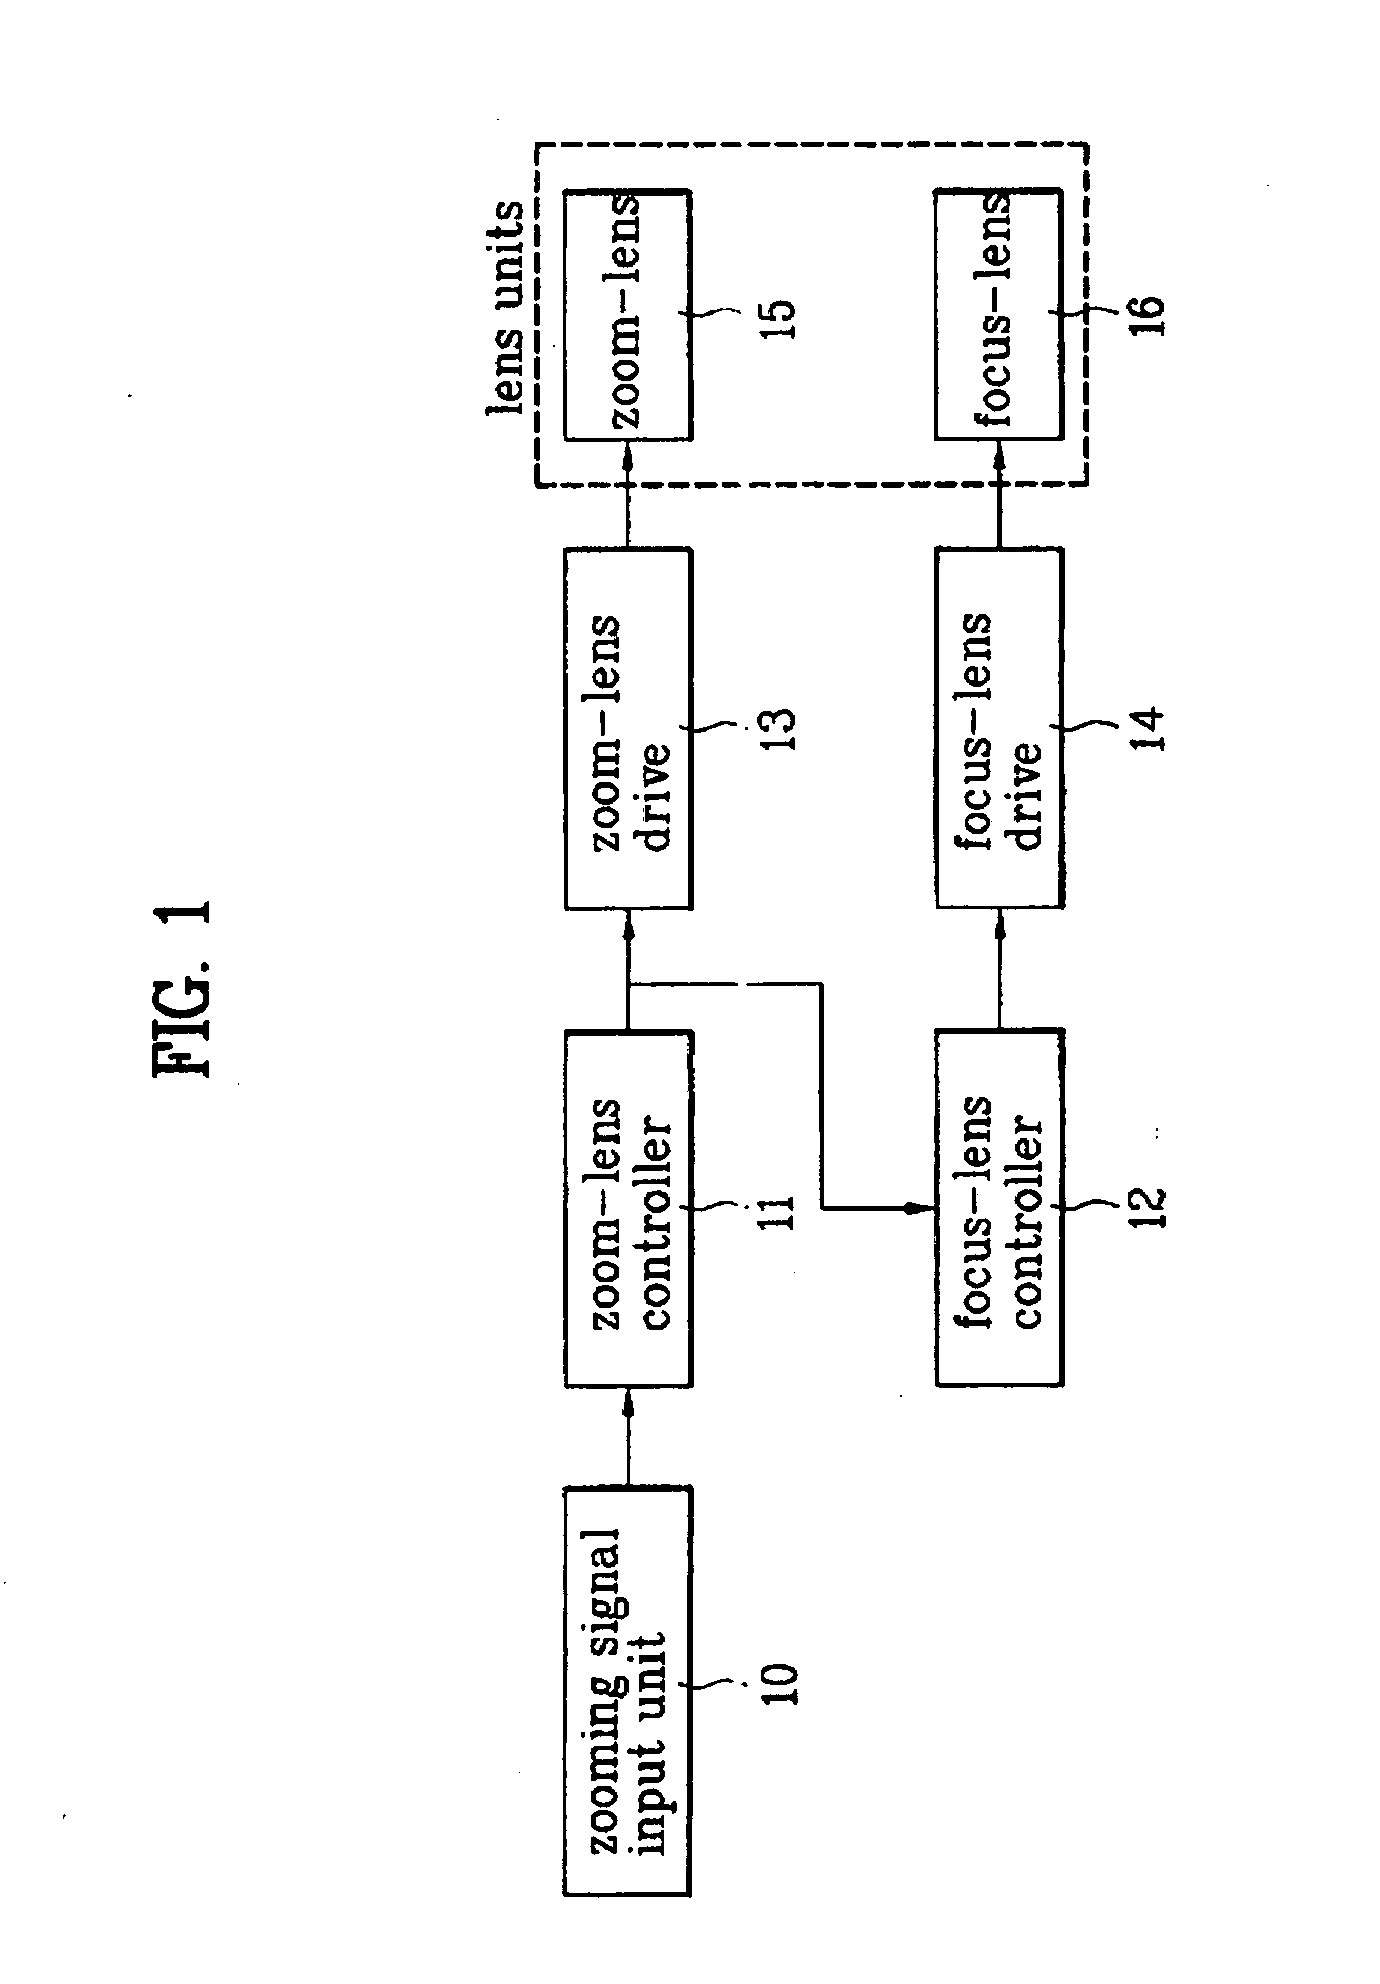 Optical zoom tracking apparatus and method, and computer-readable recording medium for performing the optical zoom tracking method